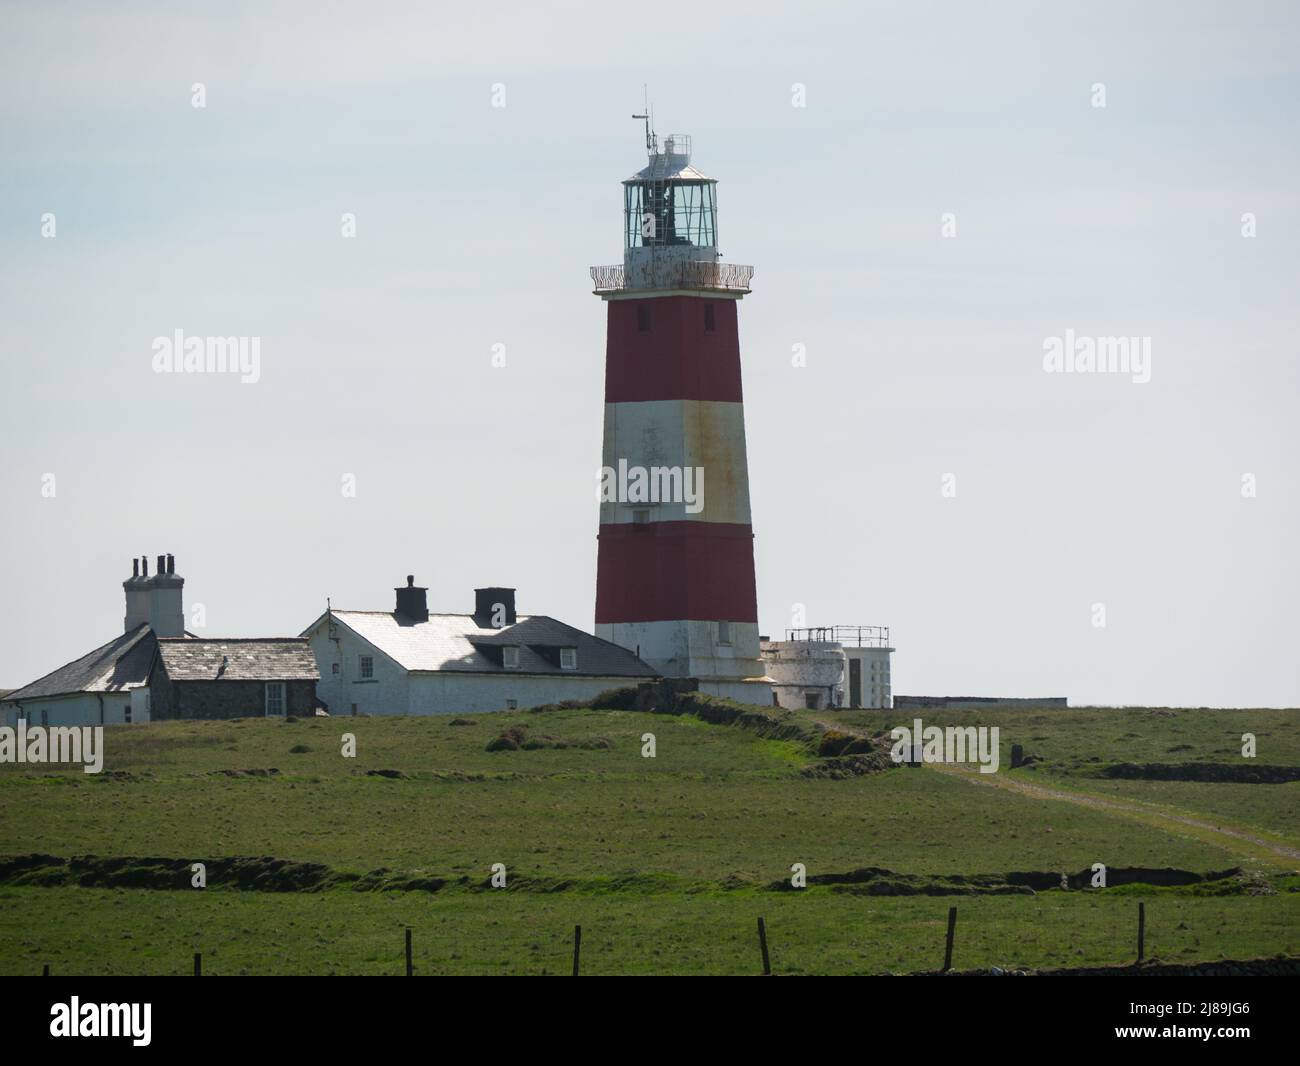 Bardsey Lighthouse stands on the southerly tip of Bardsey Island off Llŷn Peninsula in Gwynedd Wales UK and guides vessels passing through St George's Stock Photo